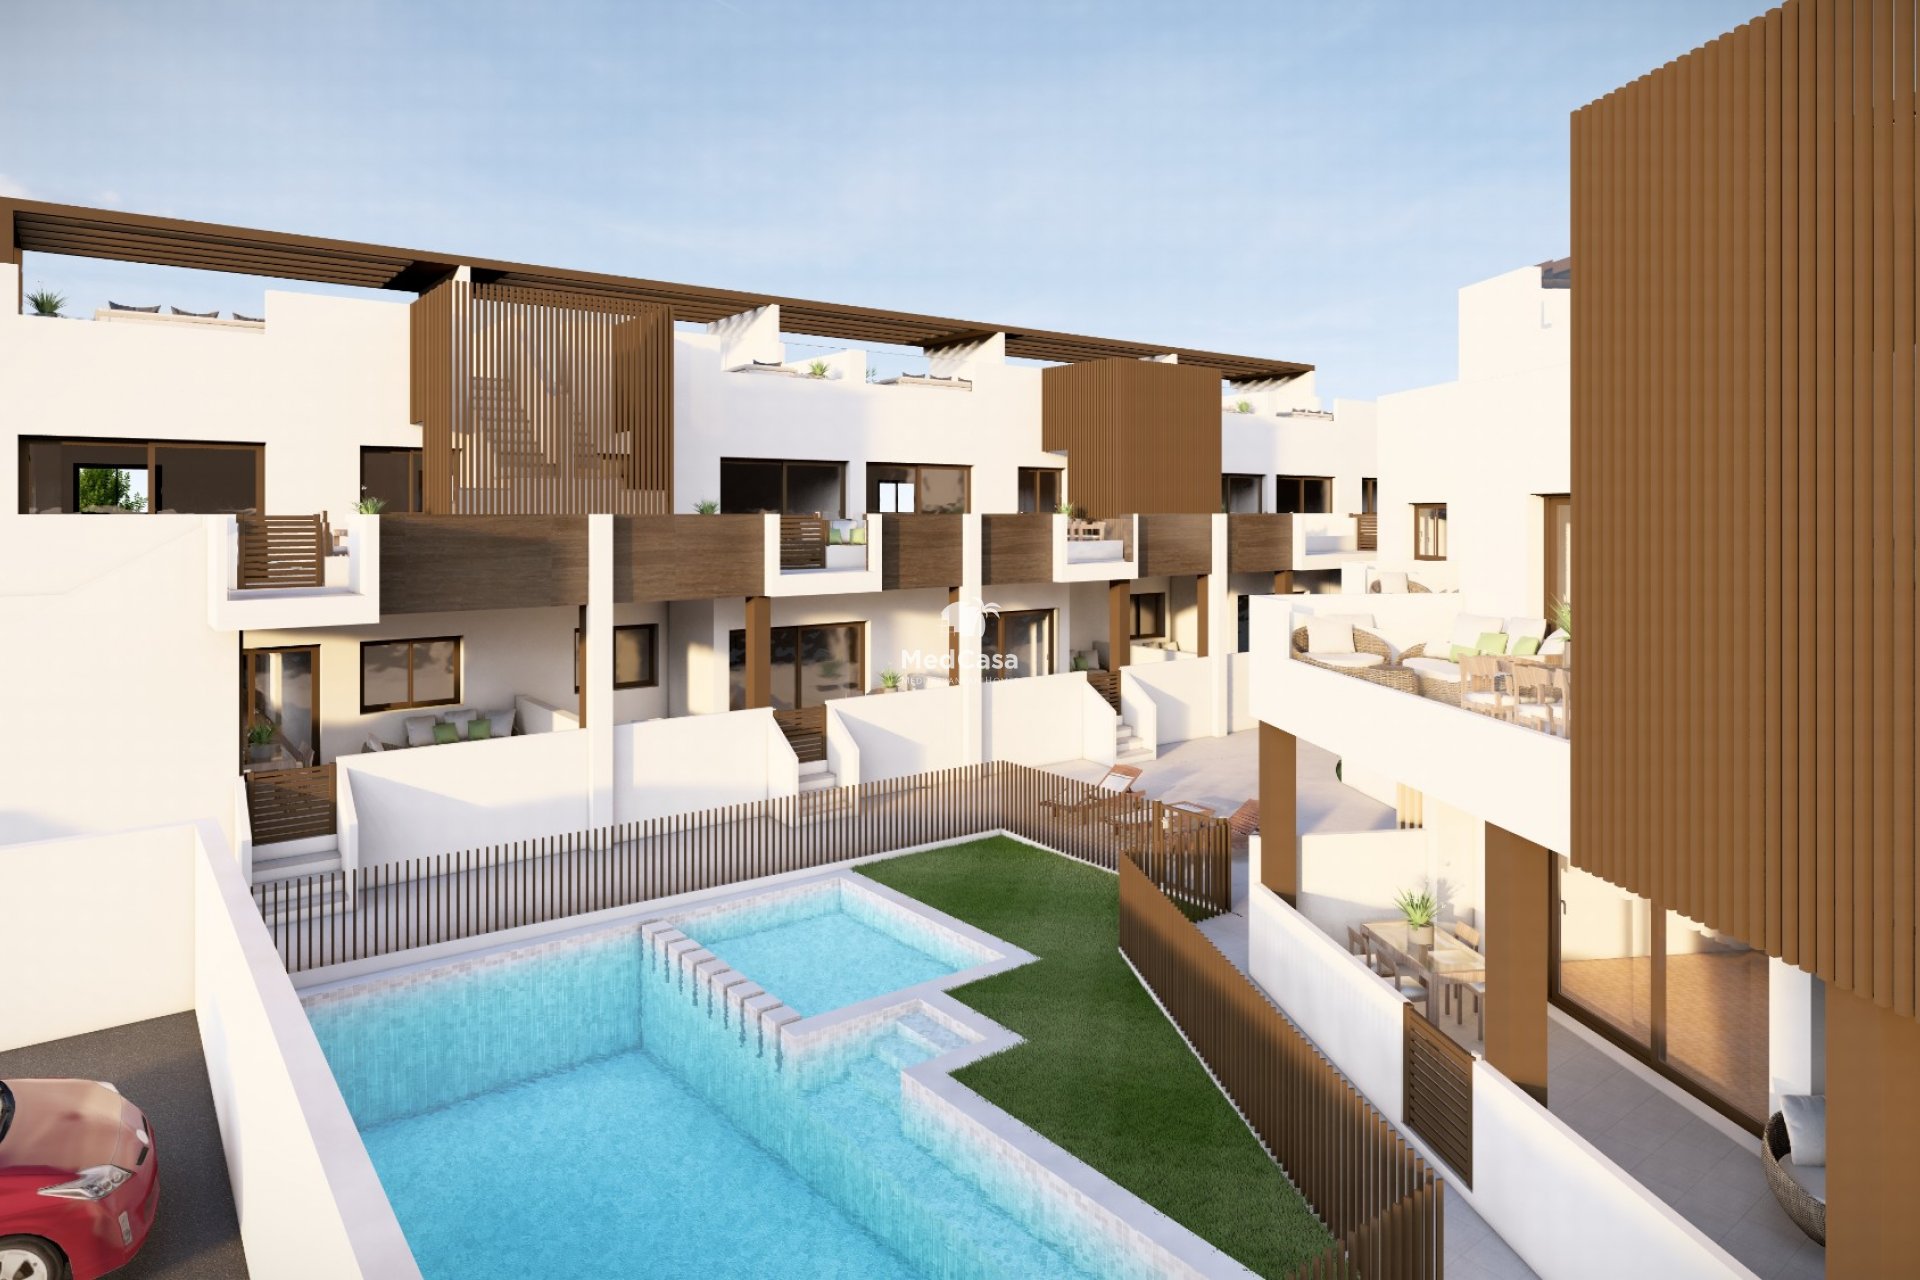 Small exclusive residential complex with bungalow apartments, large terrace areas and communal pool